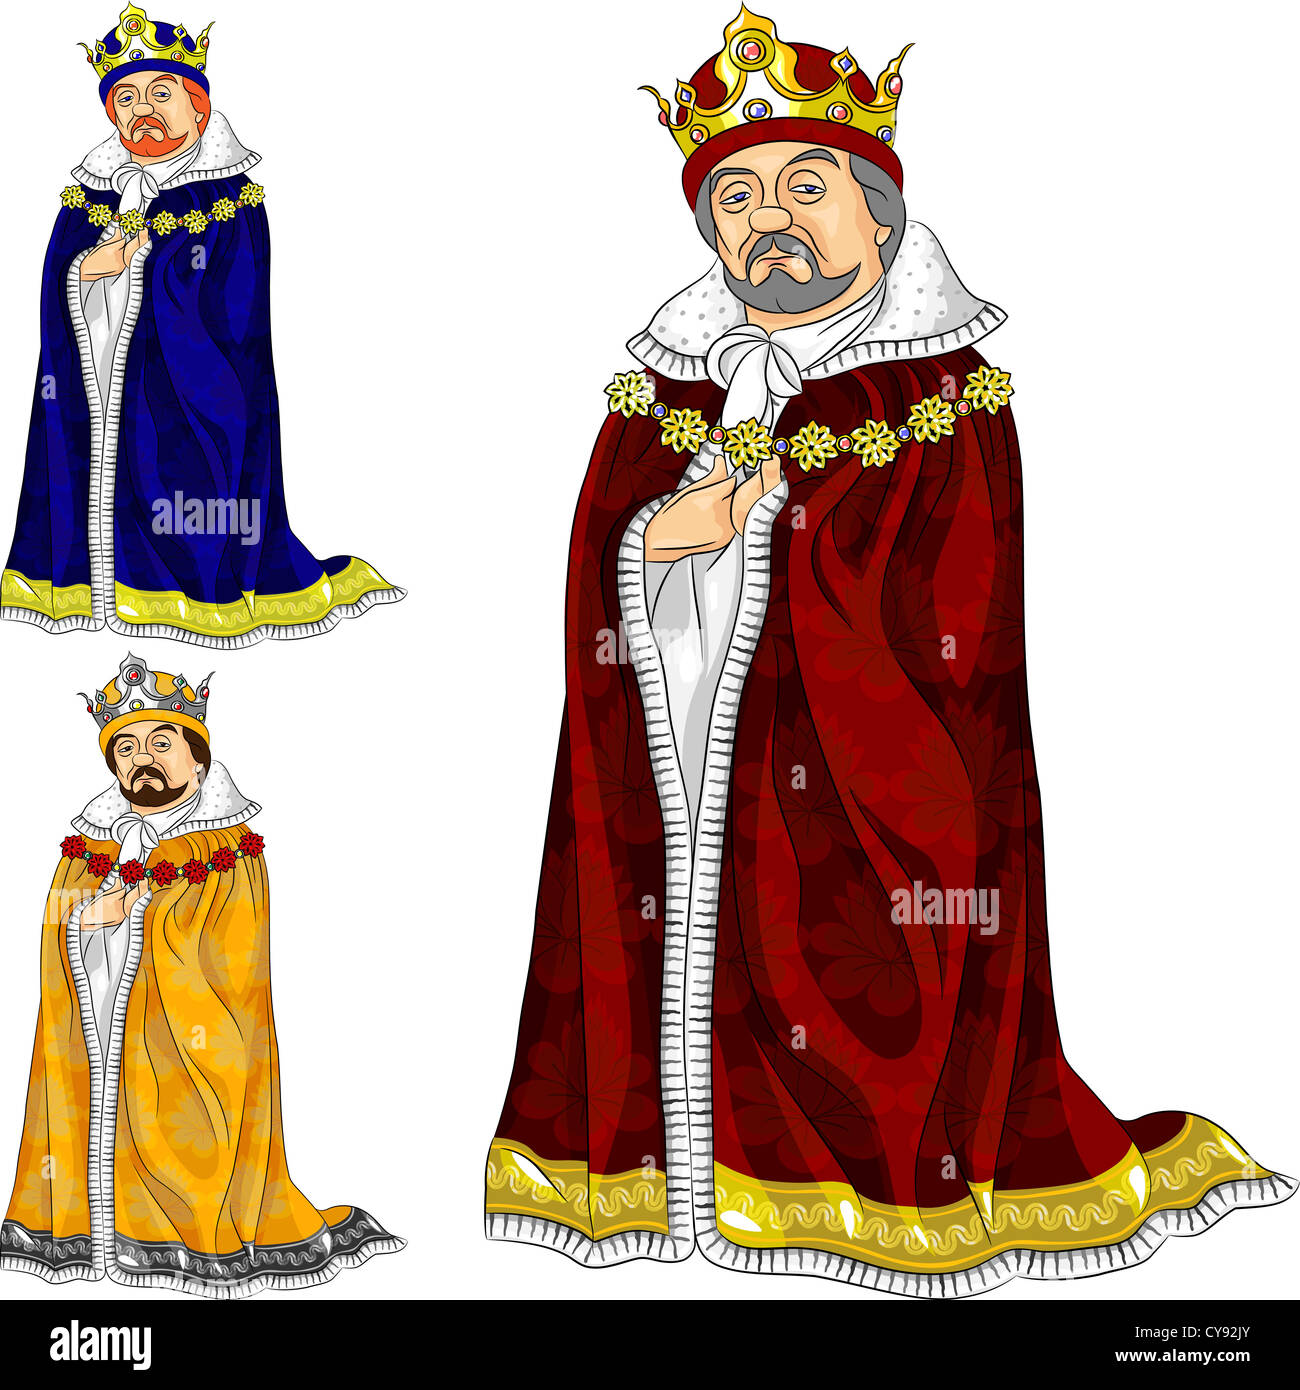 set of funny fairytale cartoon king in ceremonial robes and crown in three colors Stock Photo